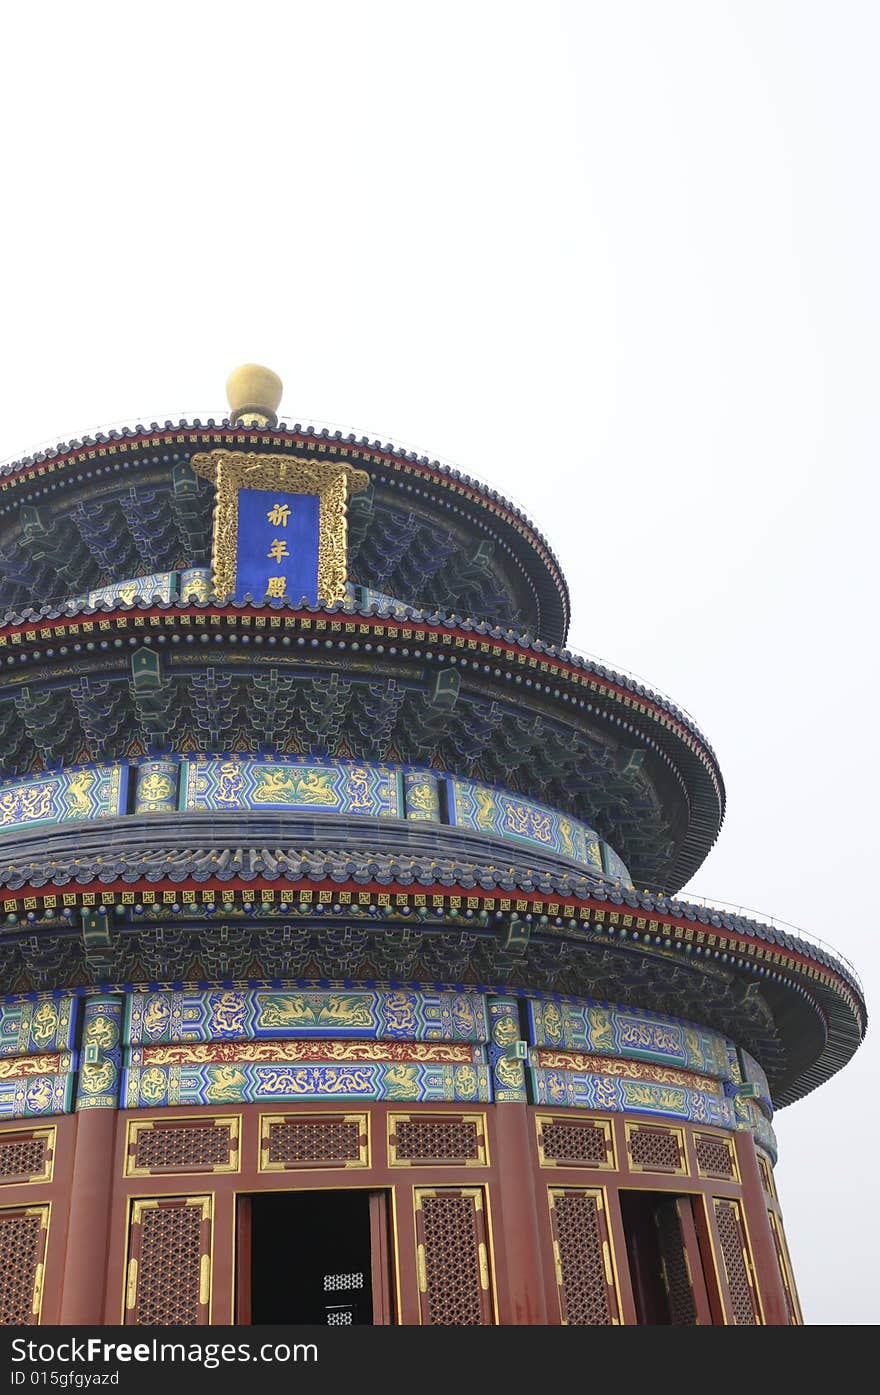 Roof detail of the Temple of Heaven, Beijing, China